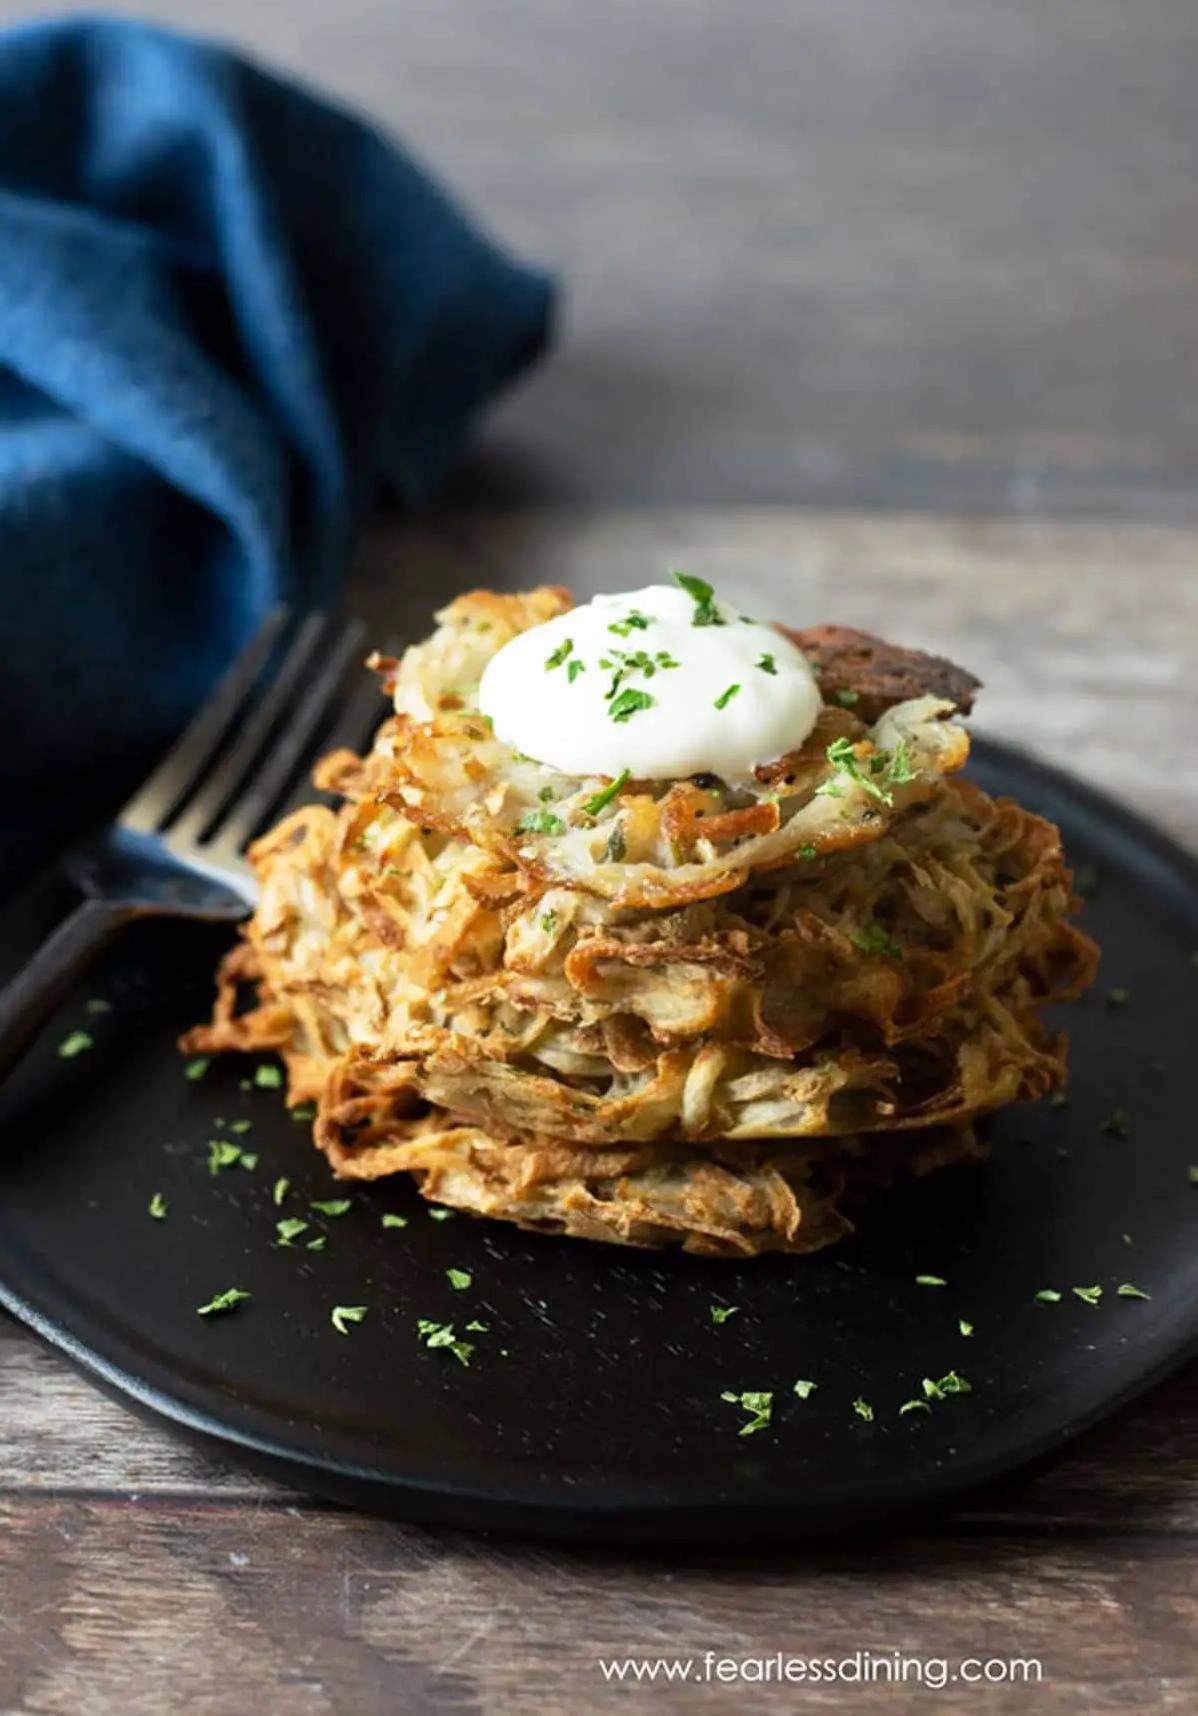  All the comfort of a traditional latke, without the gluten.